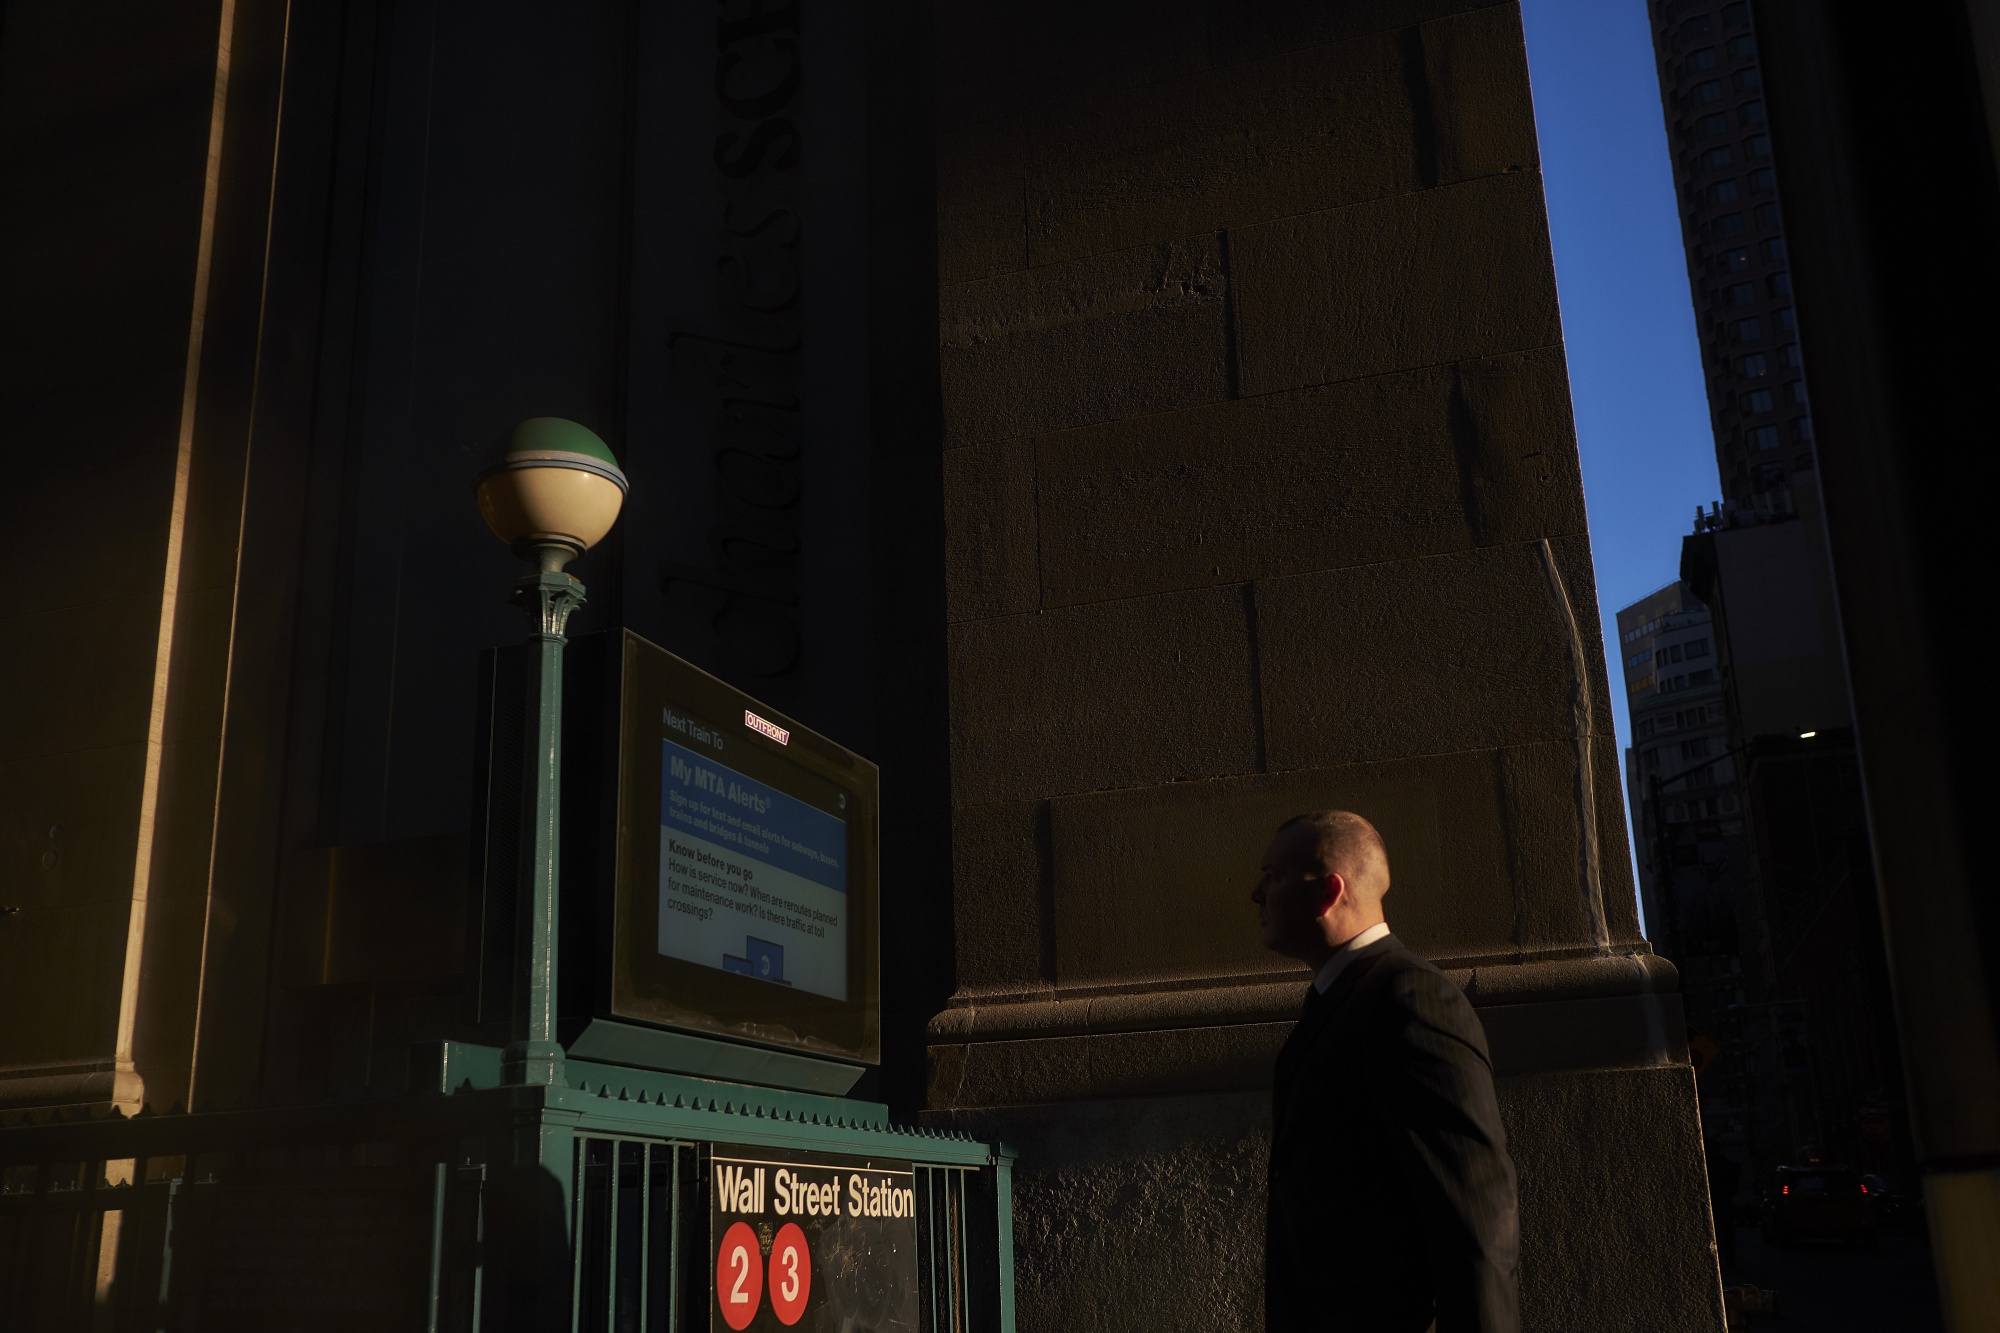 A pedestrian walks towards an entrance to the Wall Street subway station near the New York Stock Exchange (NYSE) in New York, U.S., on Thursday, Dec. 27, 2018.